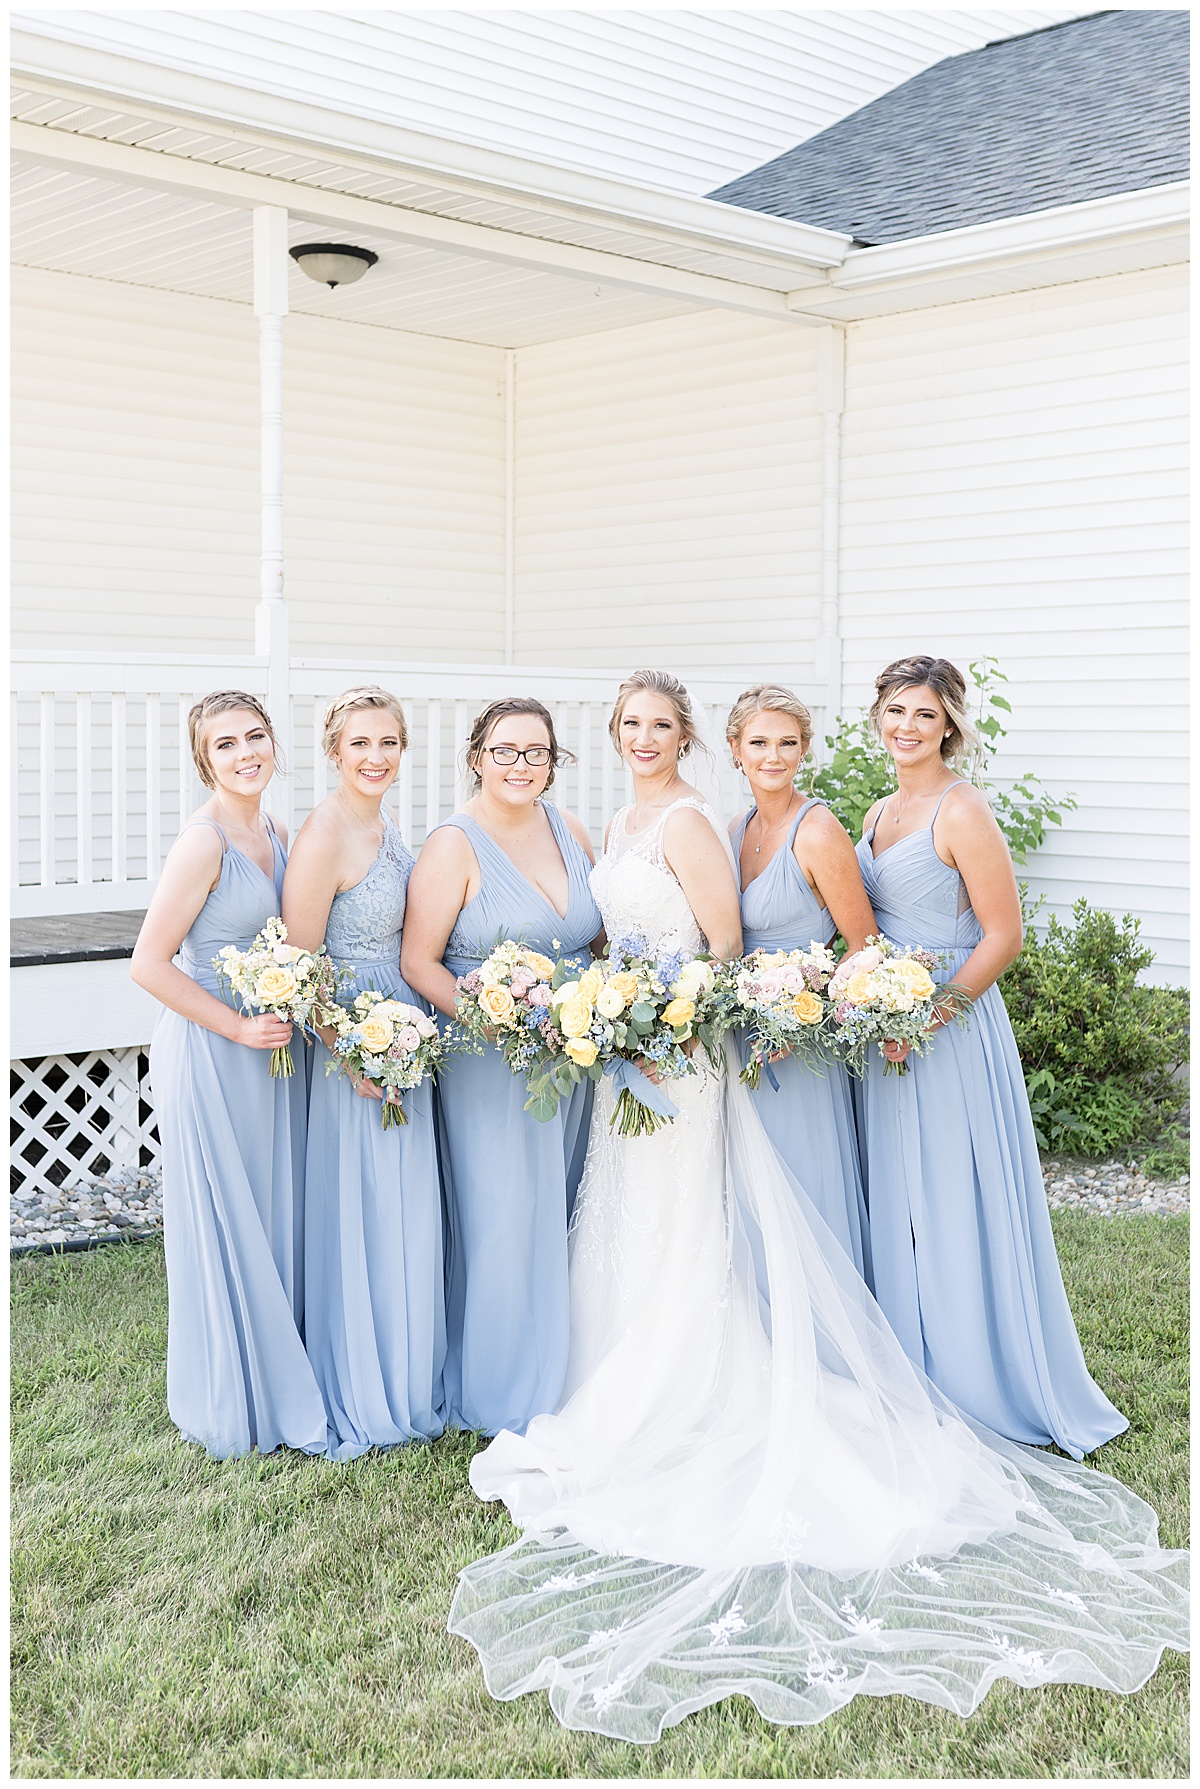 Bridal party photos at Gathering Acres wedding in Lafayette, Indiana